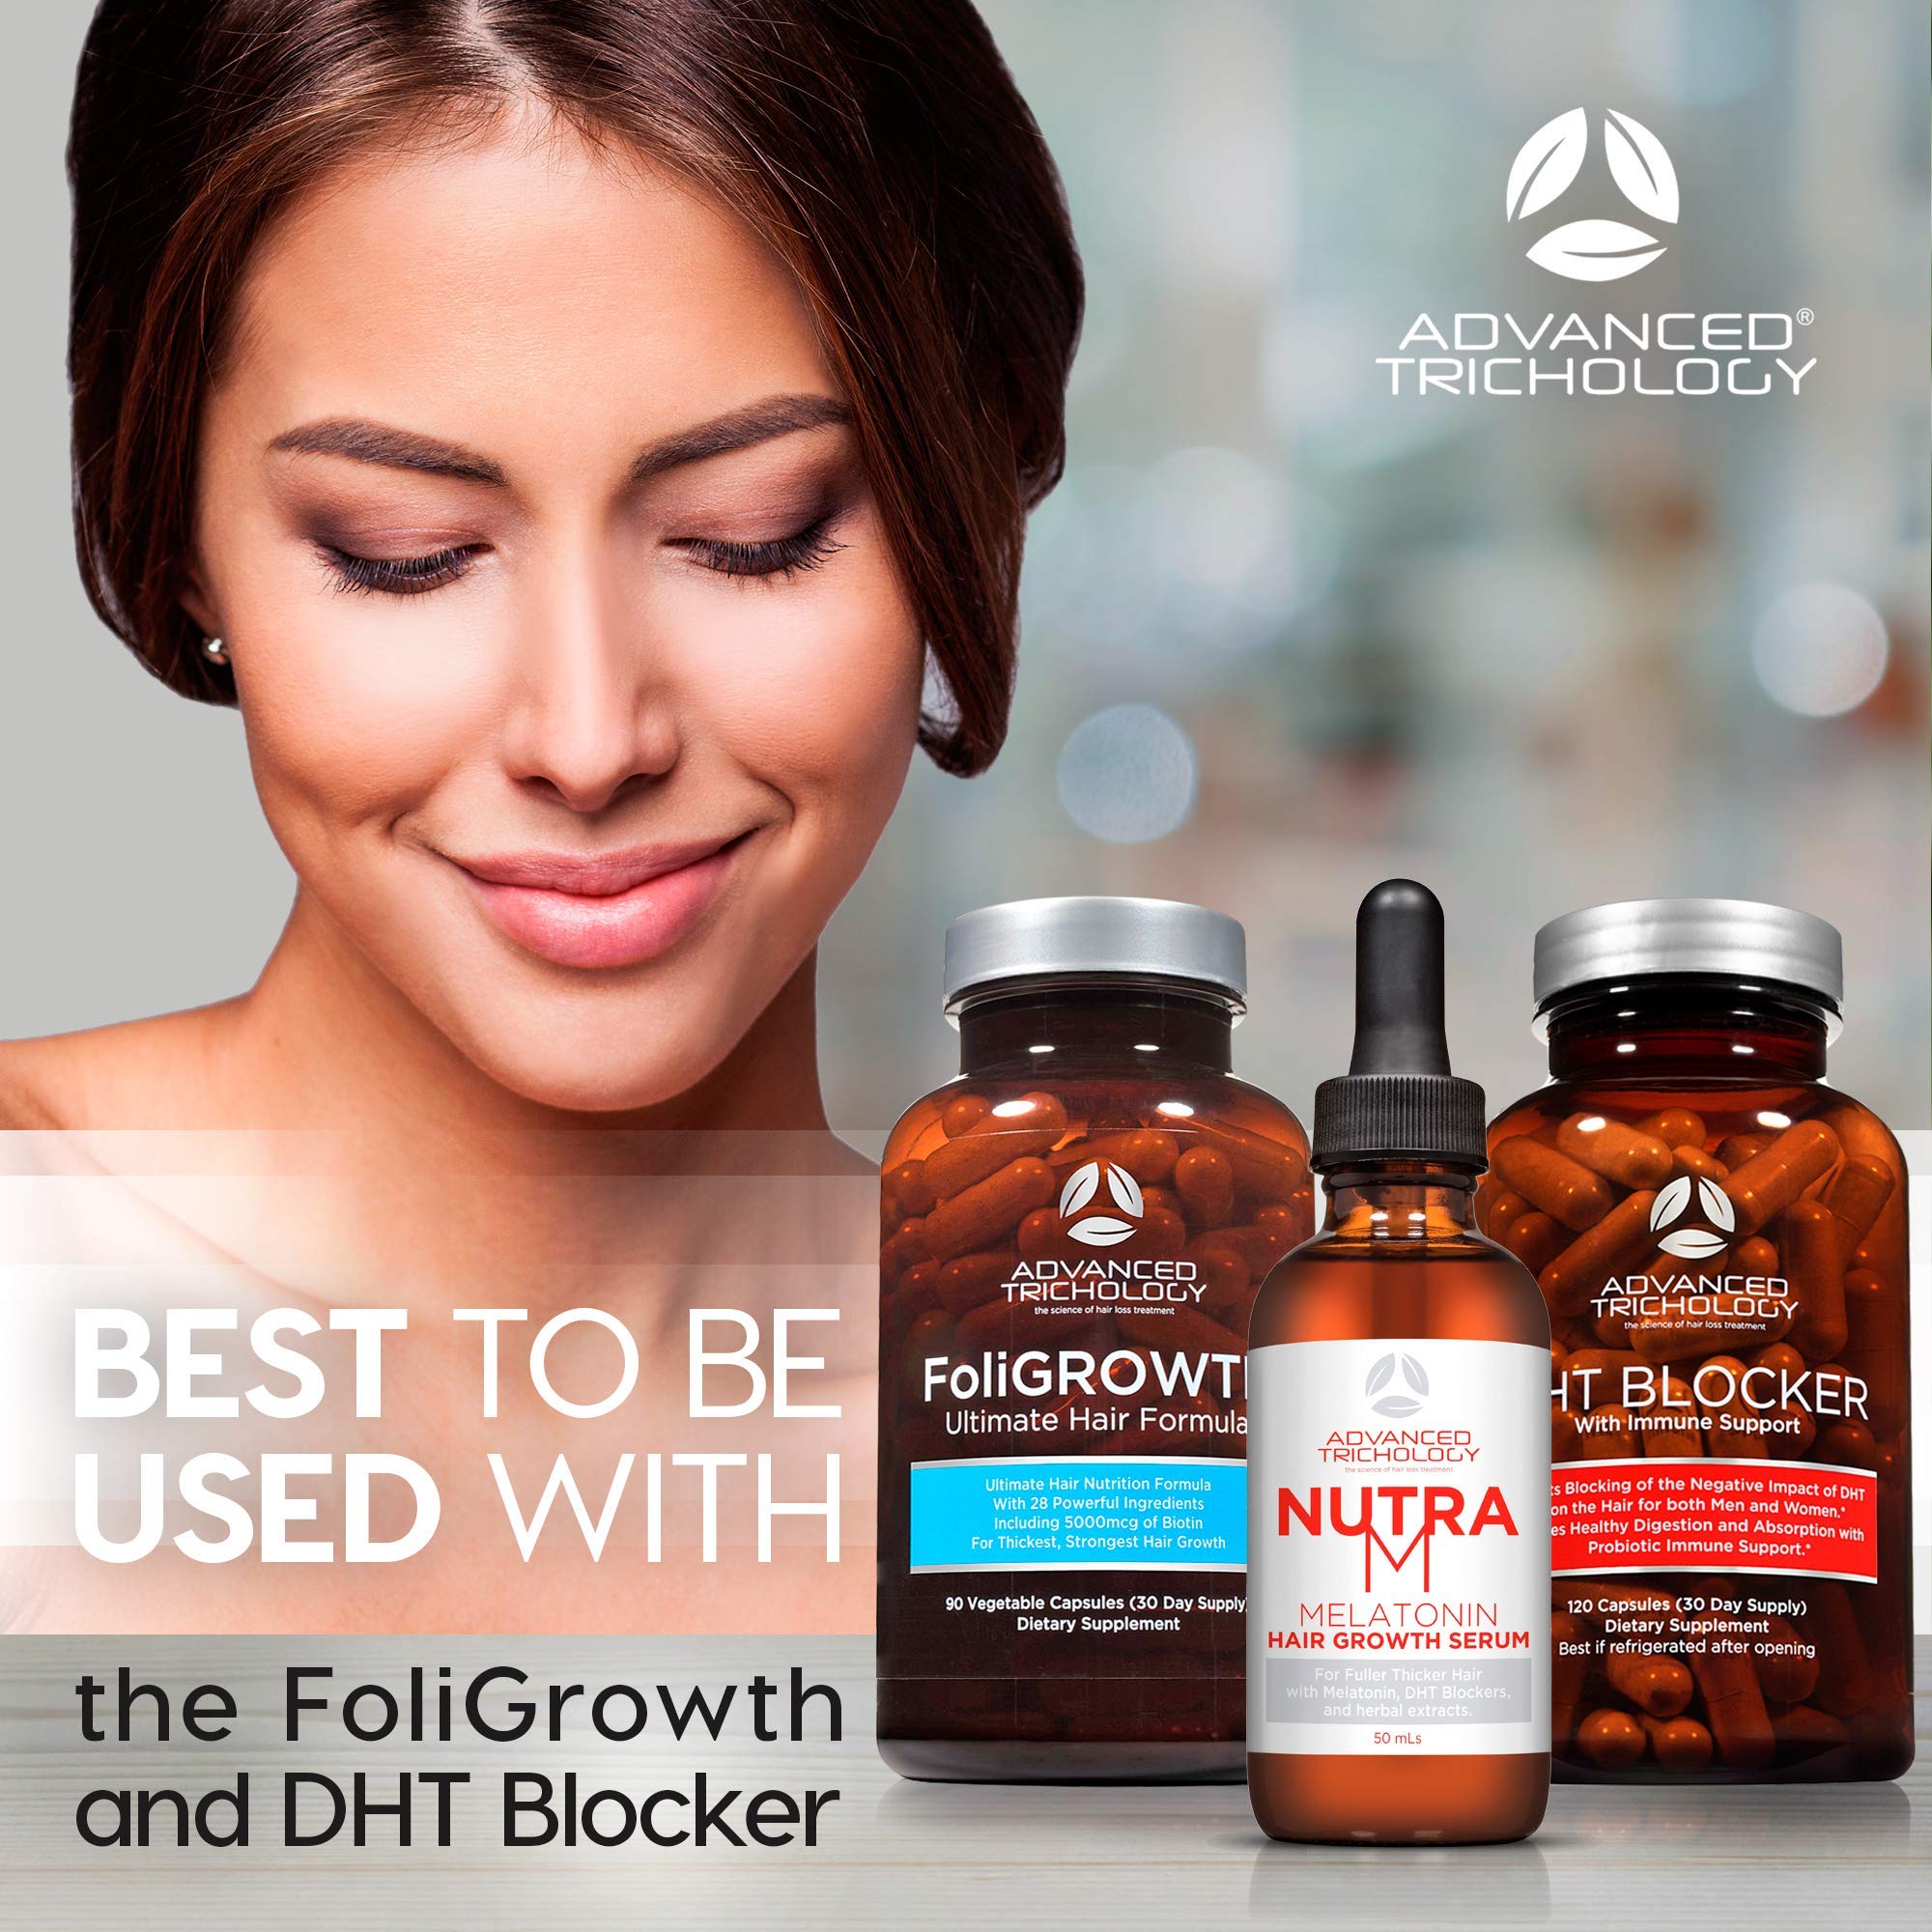 NutraM™ Hair Growth Serum - Dermatologist Tested, Approved* by American Hair Loss Association | Scalp DHT Blocker for Thinning Hair Men and Women, Backed by 20 Years of Hair Regrowth Clinic Experience